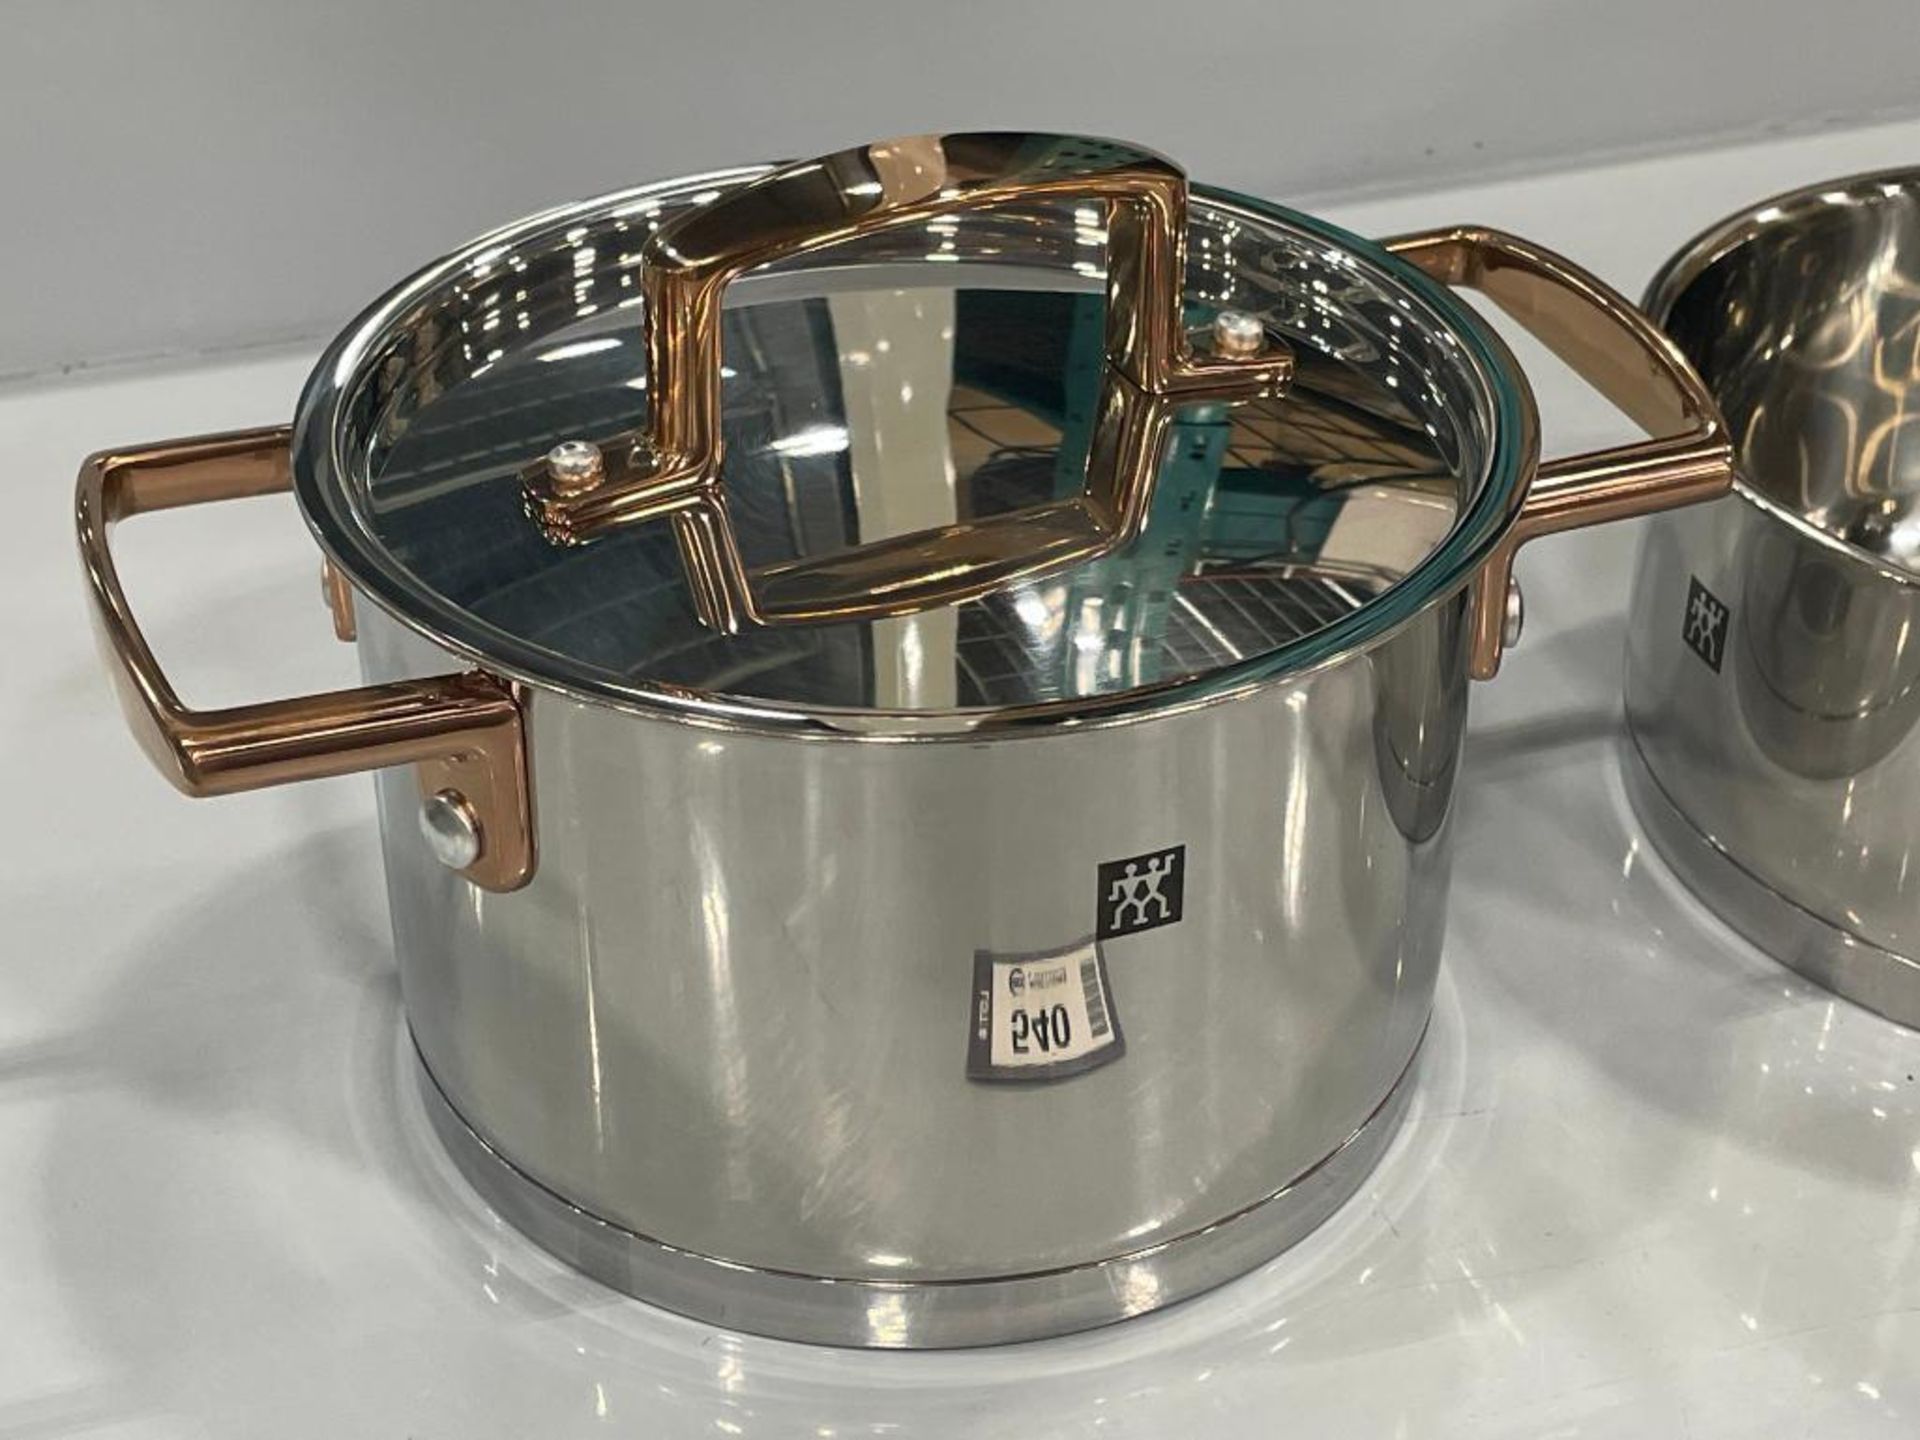 NEW ZWILLING 18/10 STAINLESS STEEL INDUCTION CAPABLE 2L STOCK POT & 1.5L SAUCE PAN - Image 4 of 12